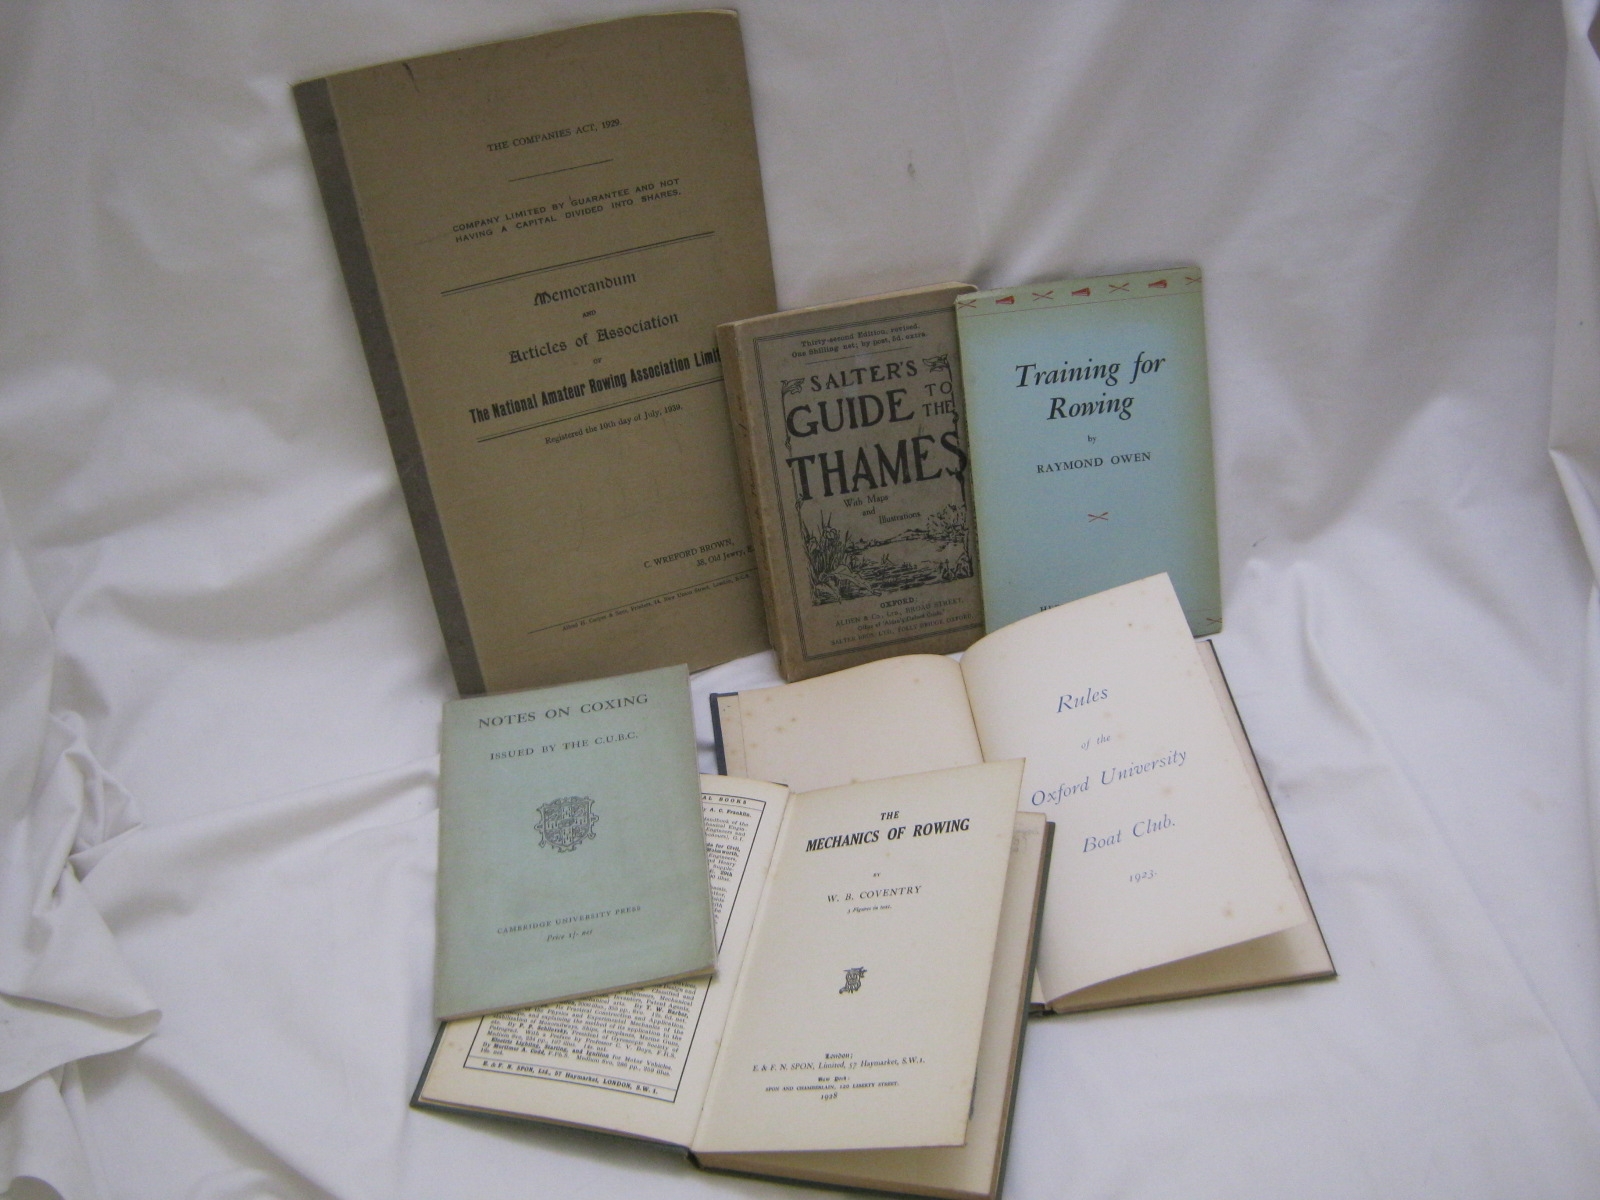 NOTES ON COXING - ISSUED BY THE CUBC, Cambridge University Press 1938, orig ptd wraps + RAYMOND